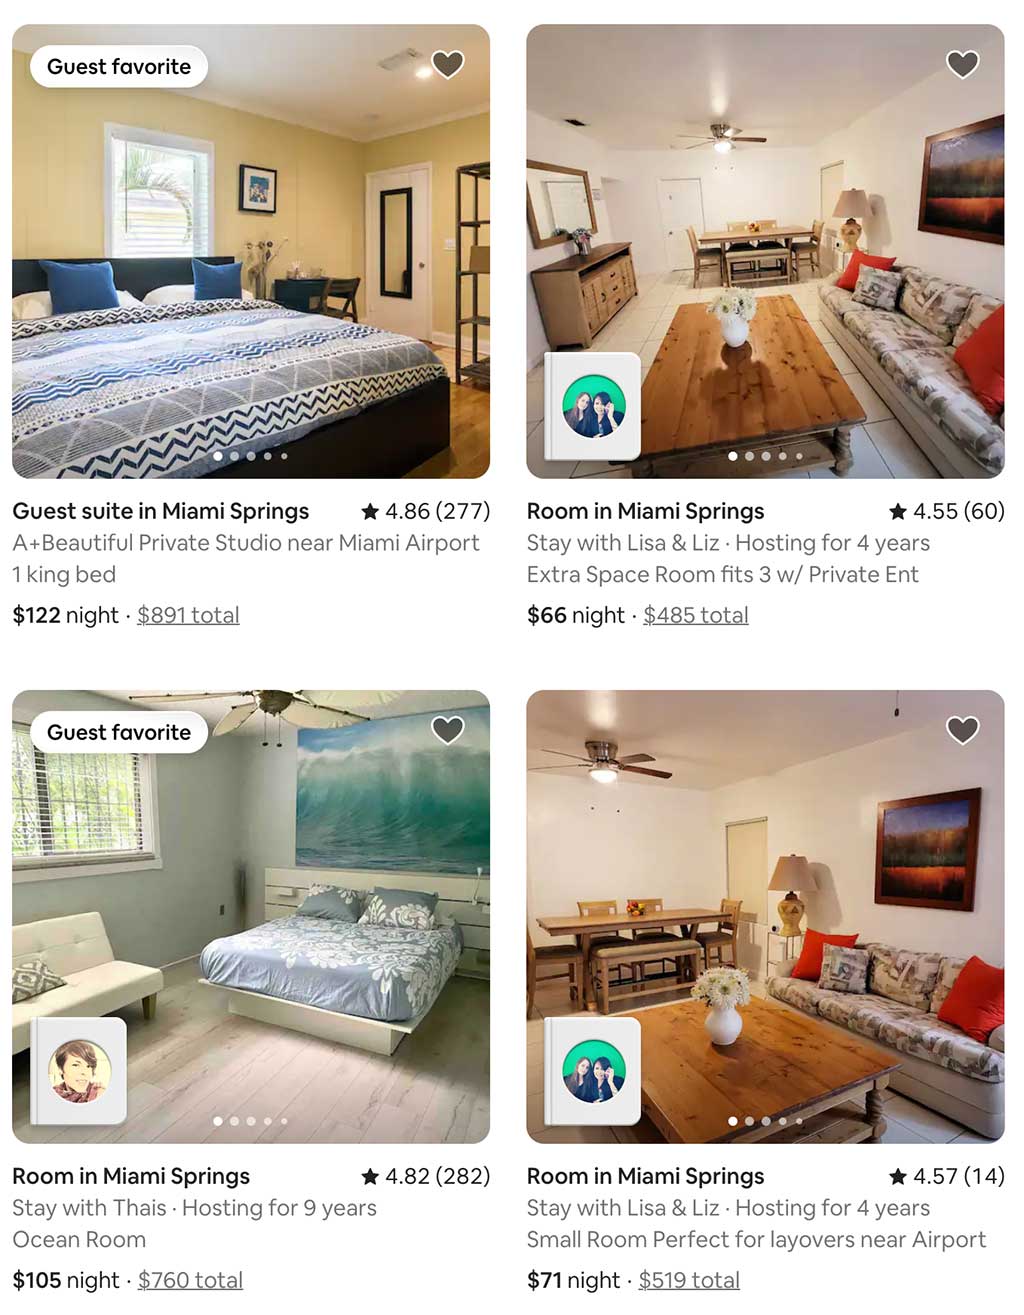 Sampling of AirBNB options in Miami Springs. Source: AirBNB